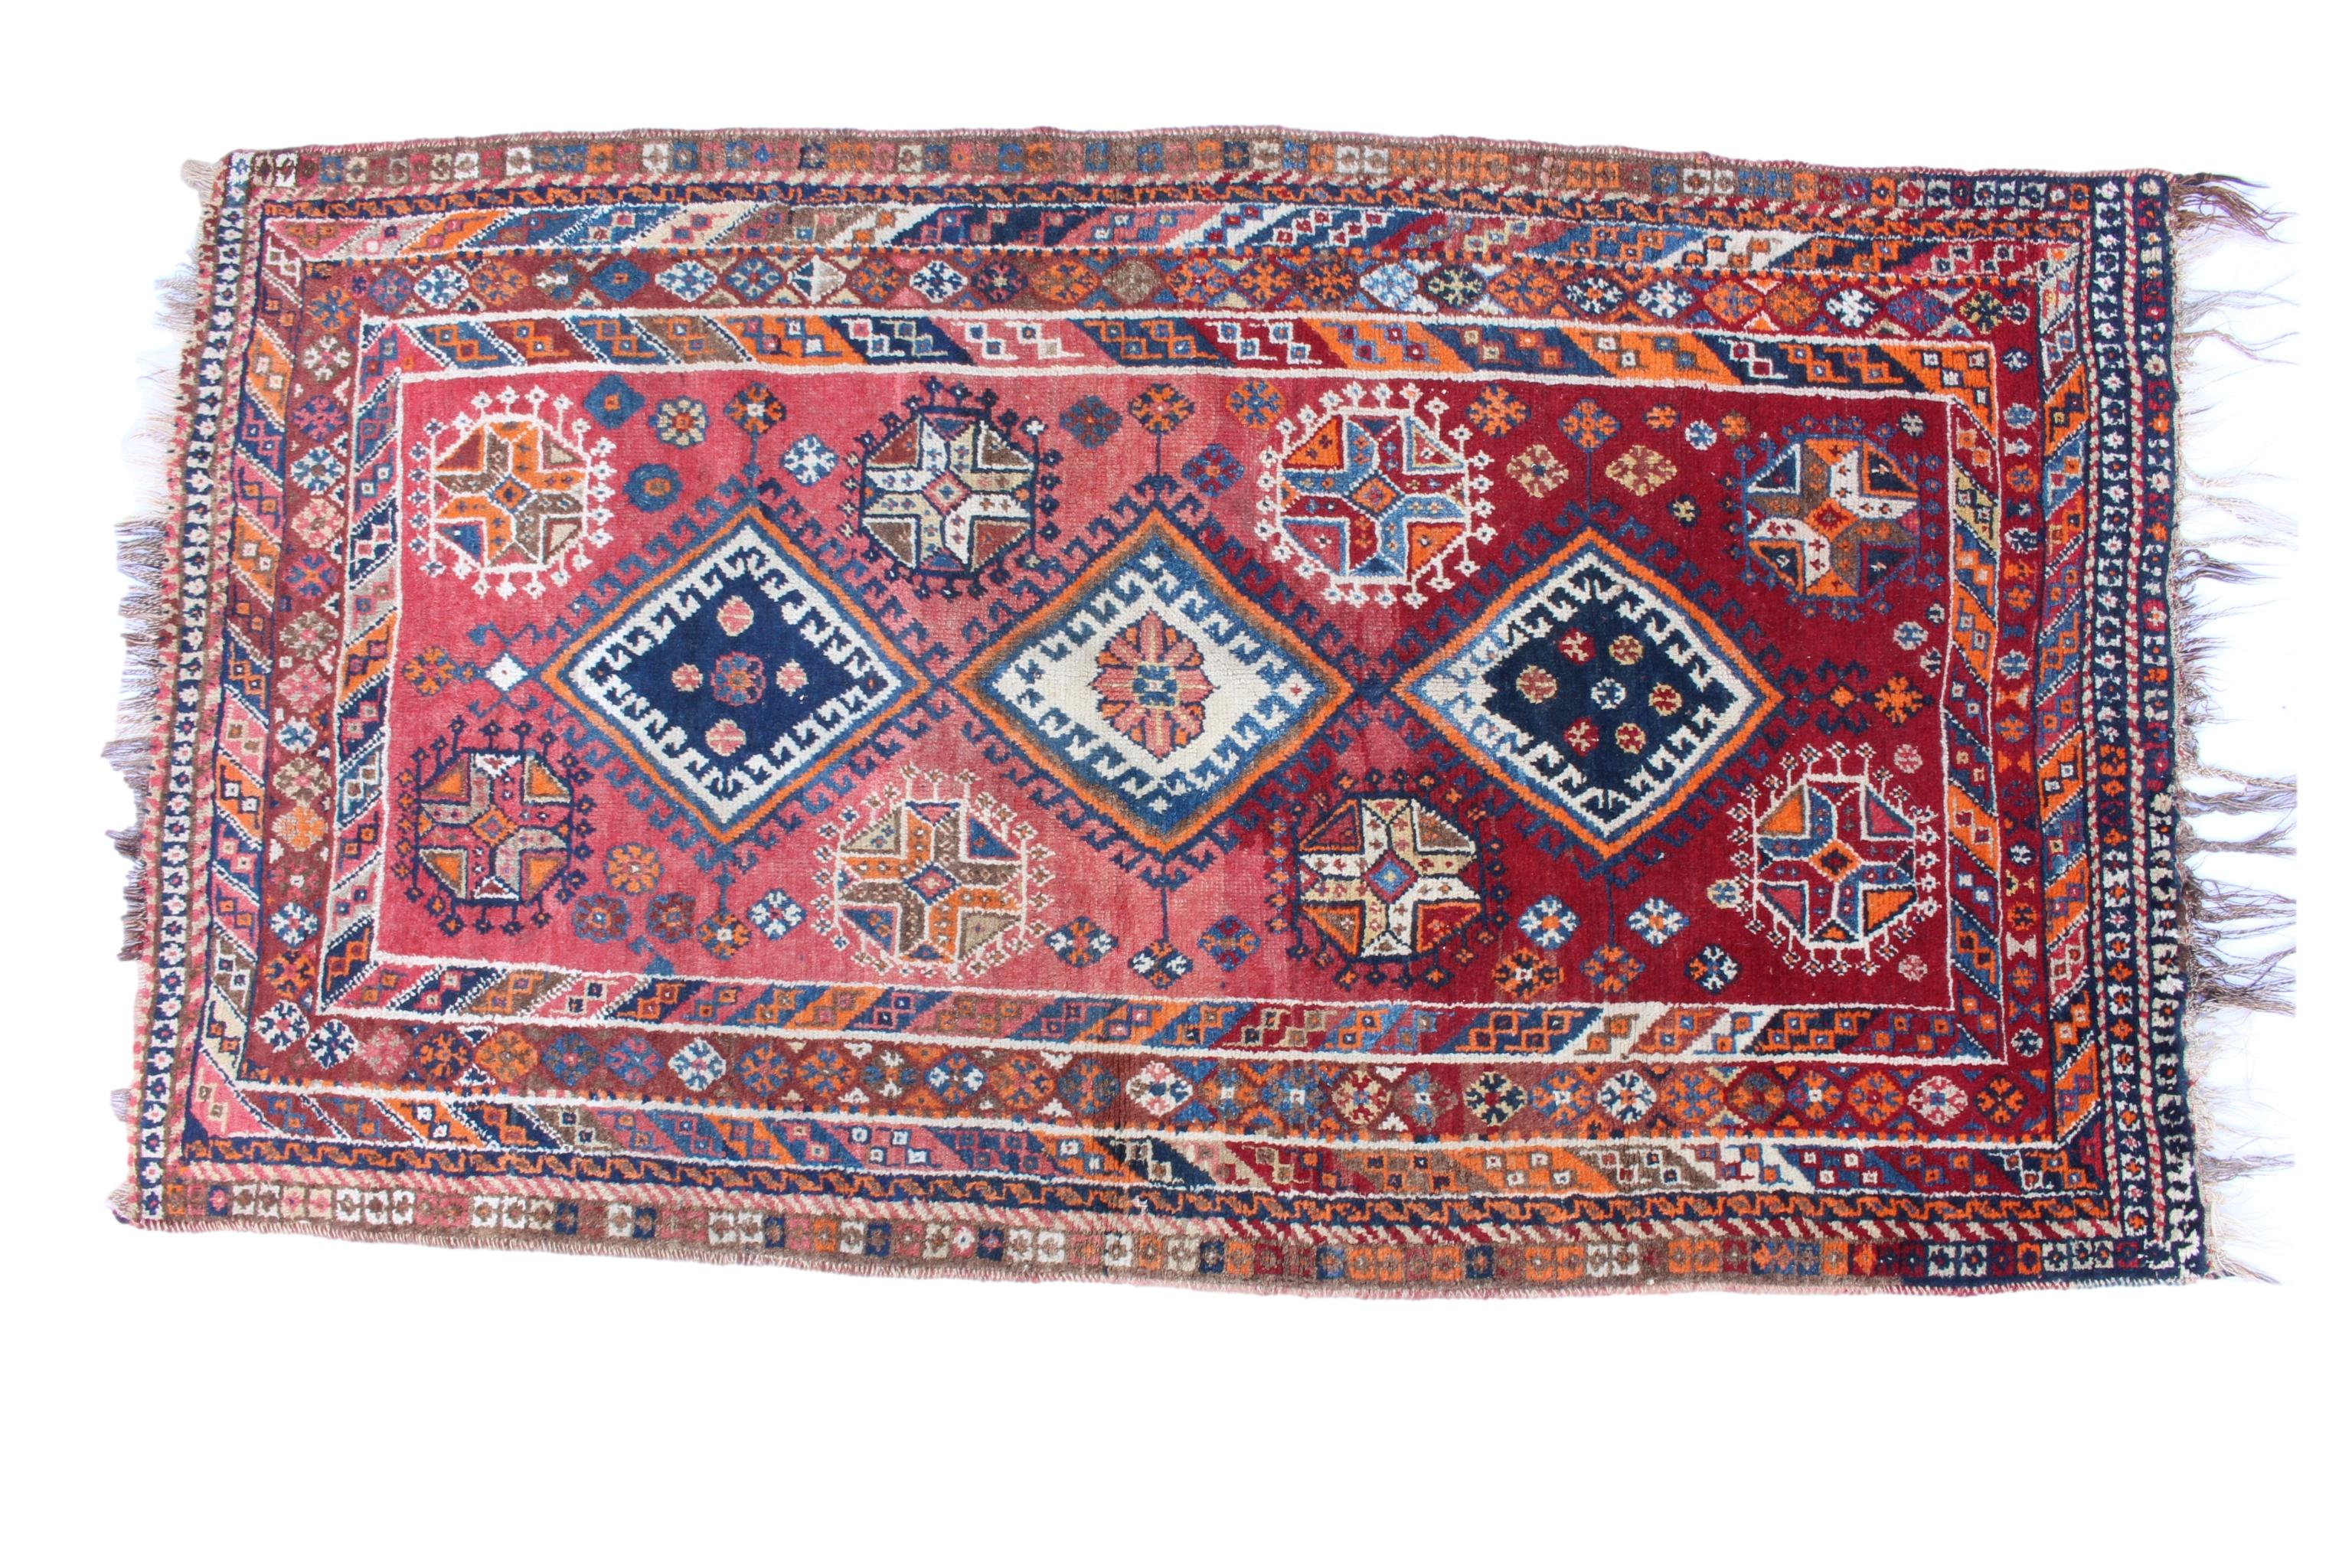 A Persian style rug, on red ground, with three hooked diamond medallions and florette and gul